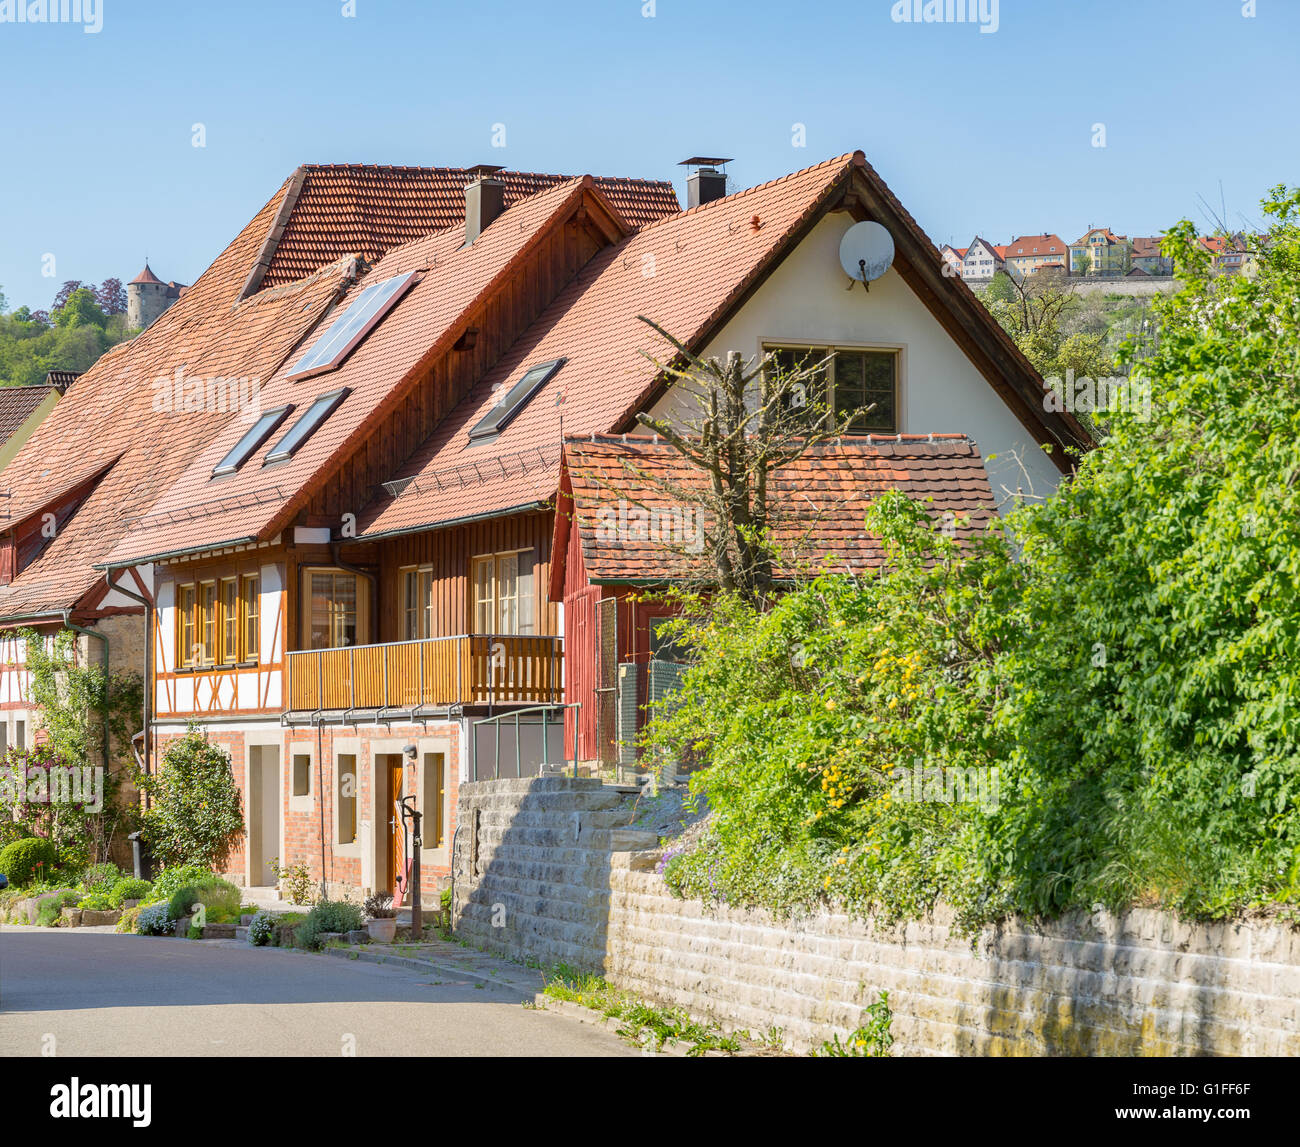 idyllic scenery around a village in Hohenlohe named Baechlingen at spring time Stock Photo